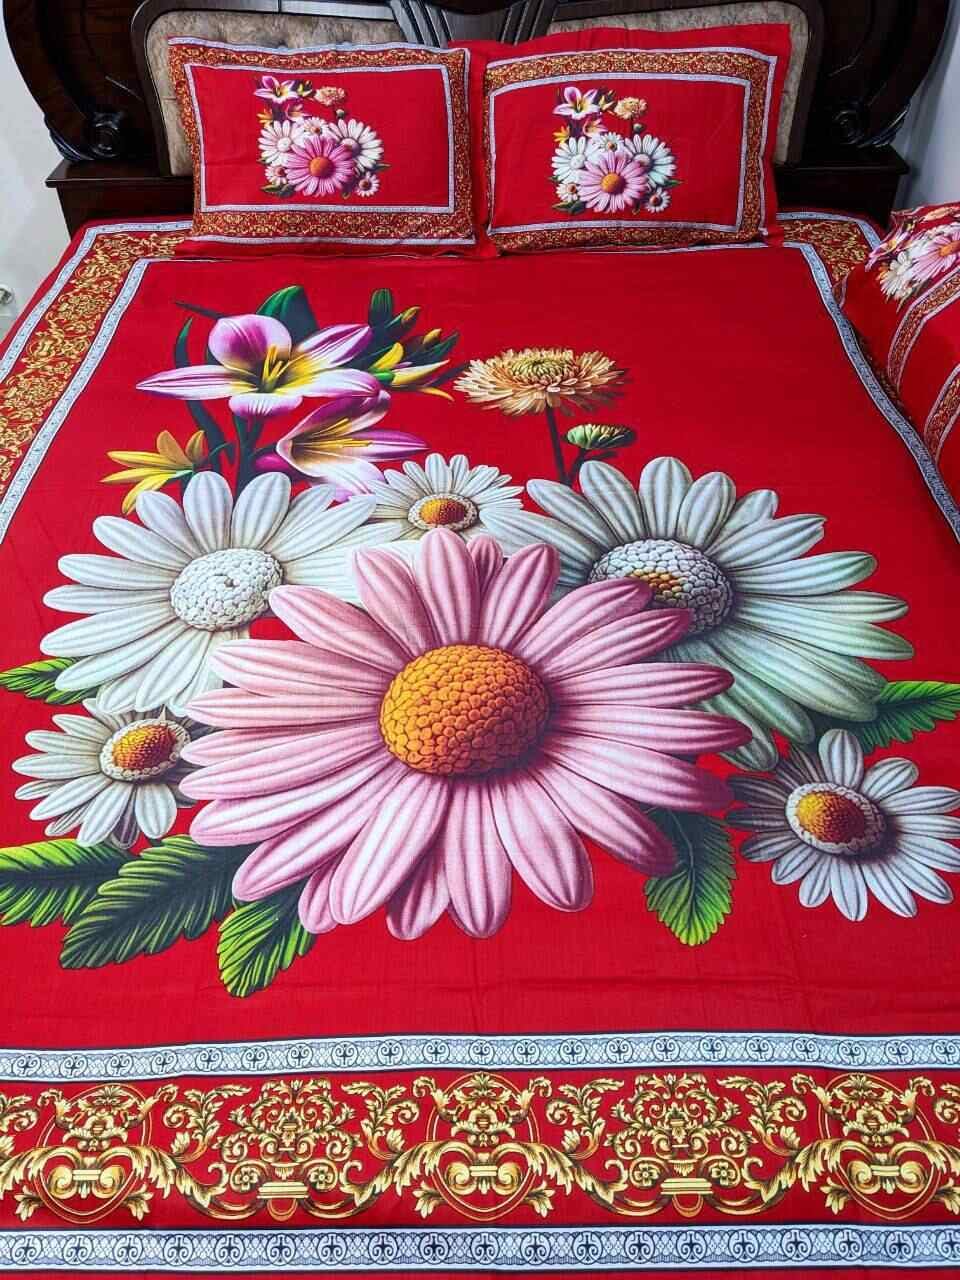 100% Cotton King Size Bedsheet (Many flowers together)  (৩ পিসের সেট)